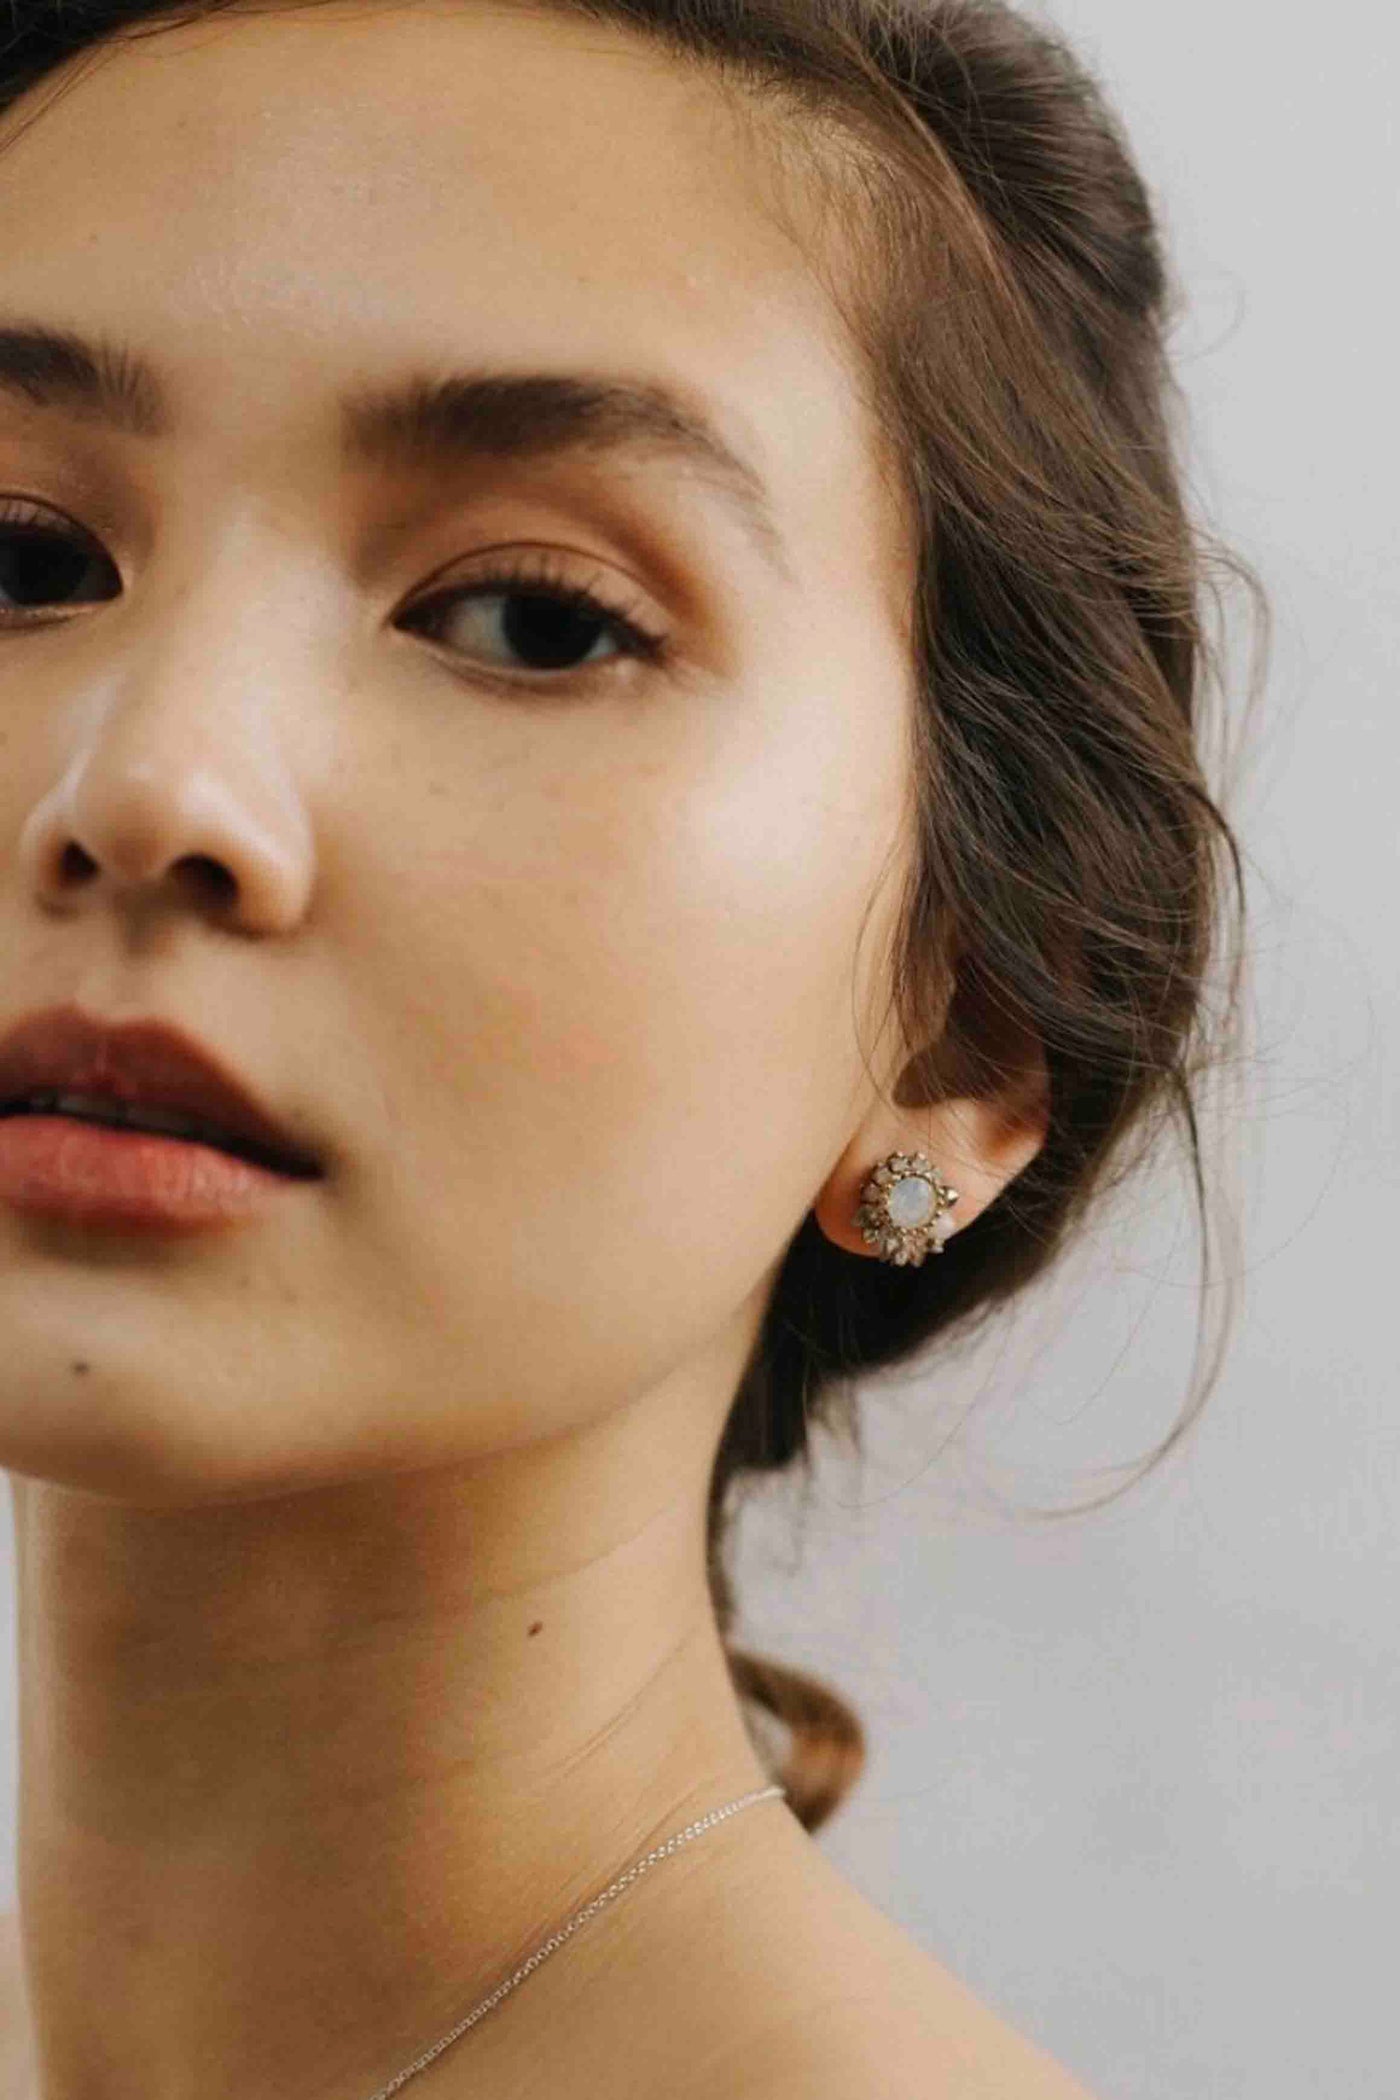 model wearing Amelia White Opal Crystal Post Earrings by Lover's Tempo